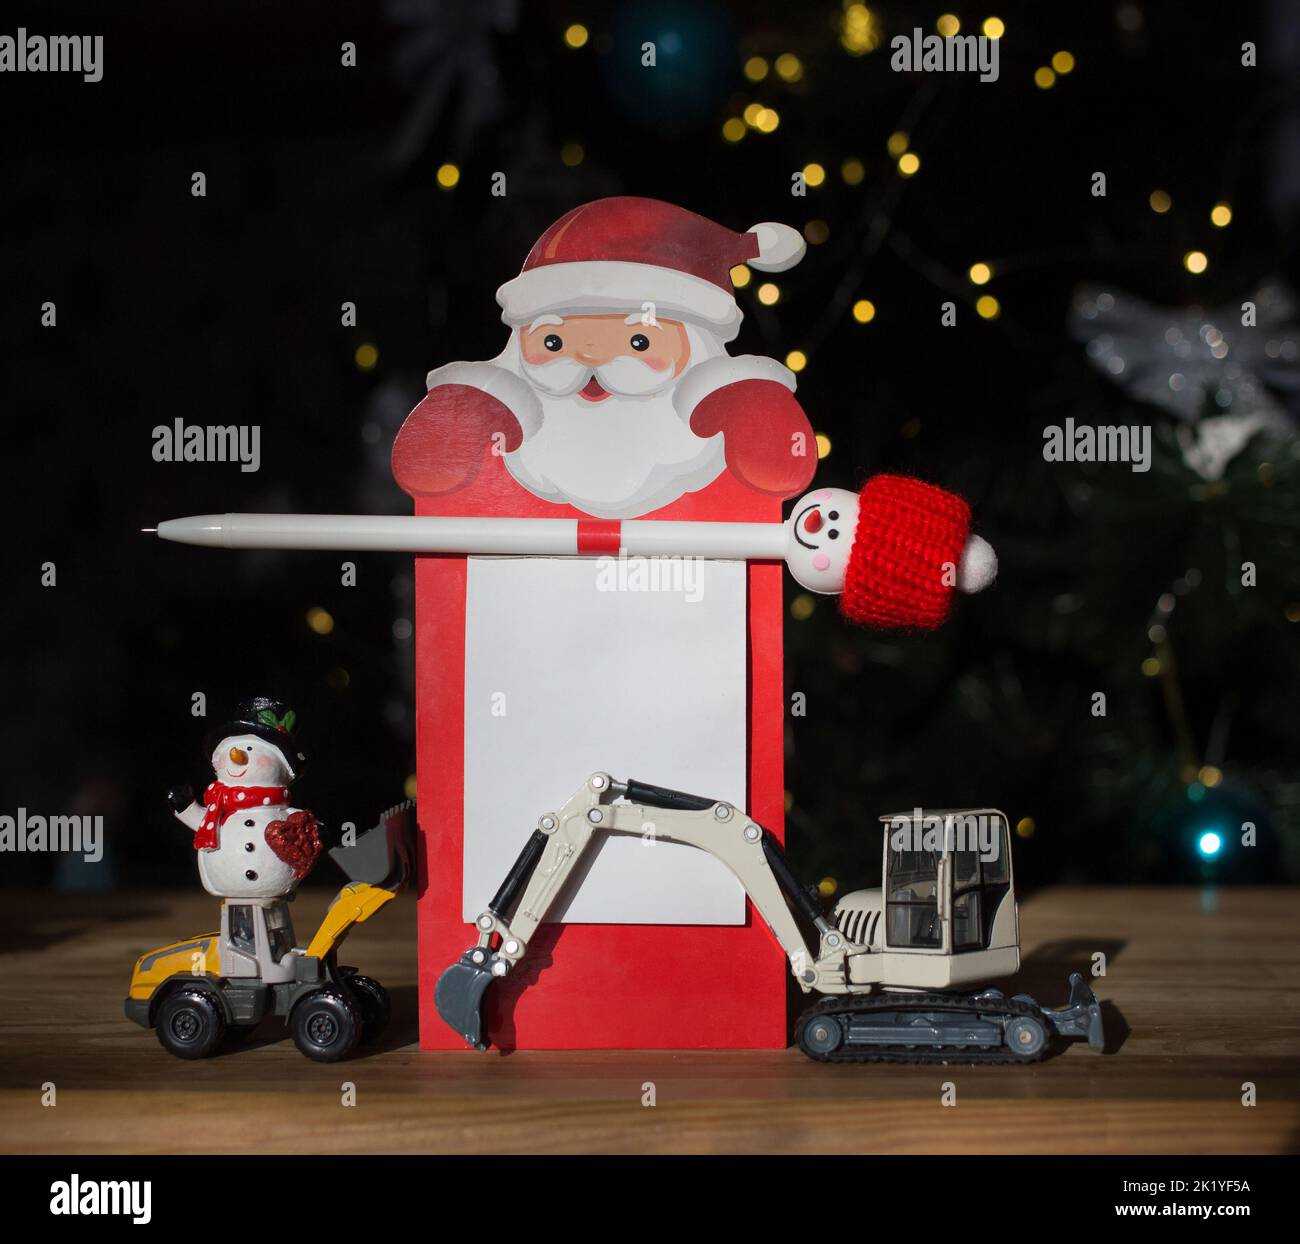 2 models of toy excavators, snowman, notebook with Santa Claus, pen on background of Christmas tree. concept of New Year's business greetings for cons Stock Photo